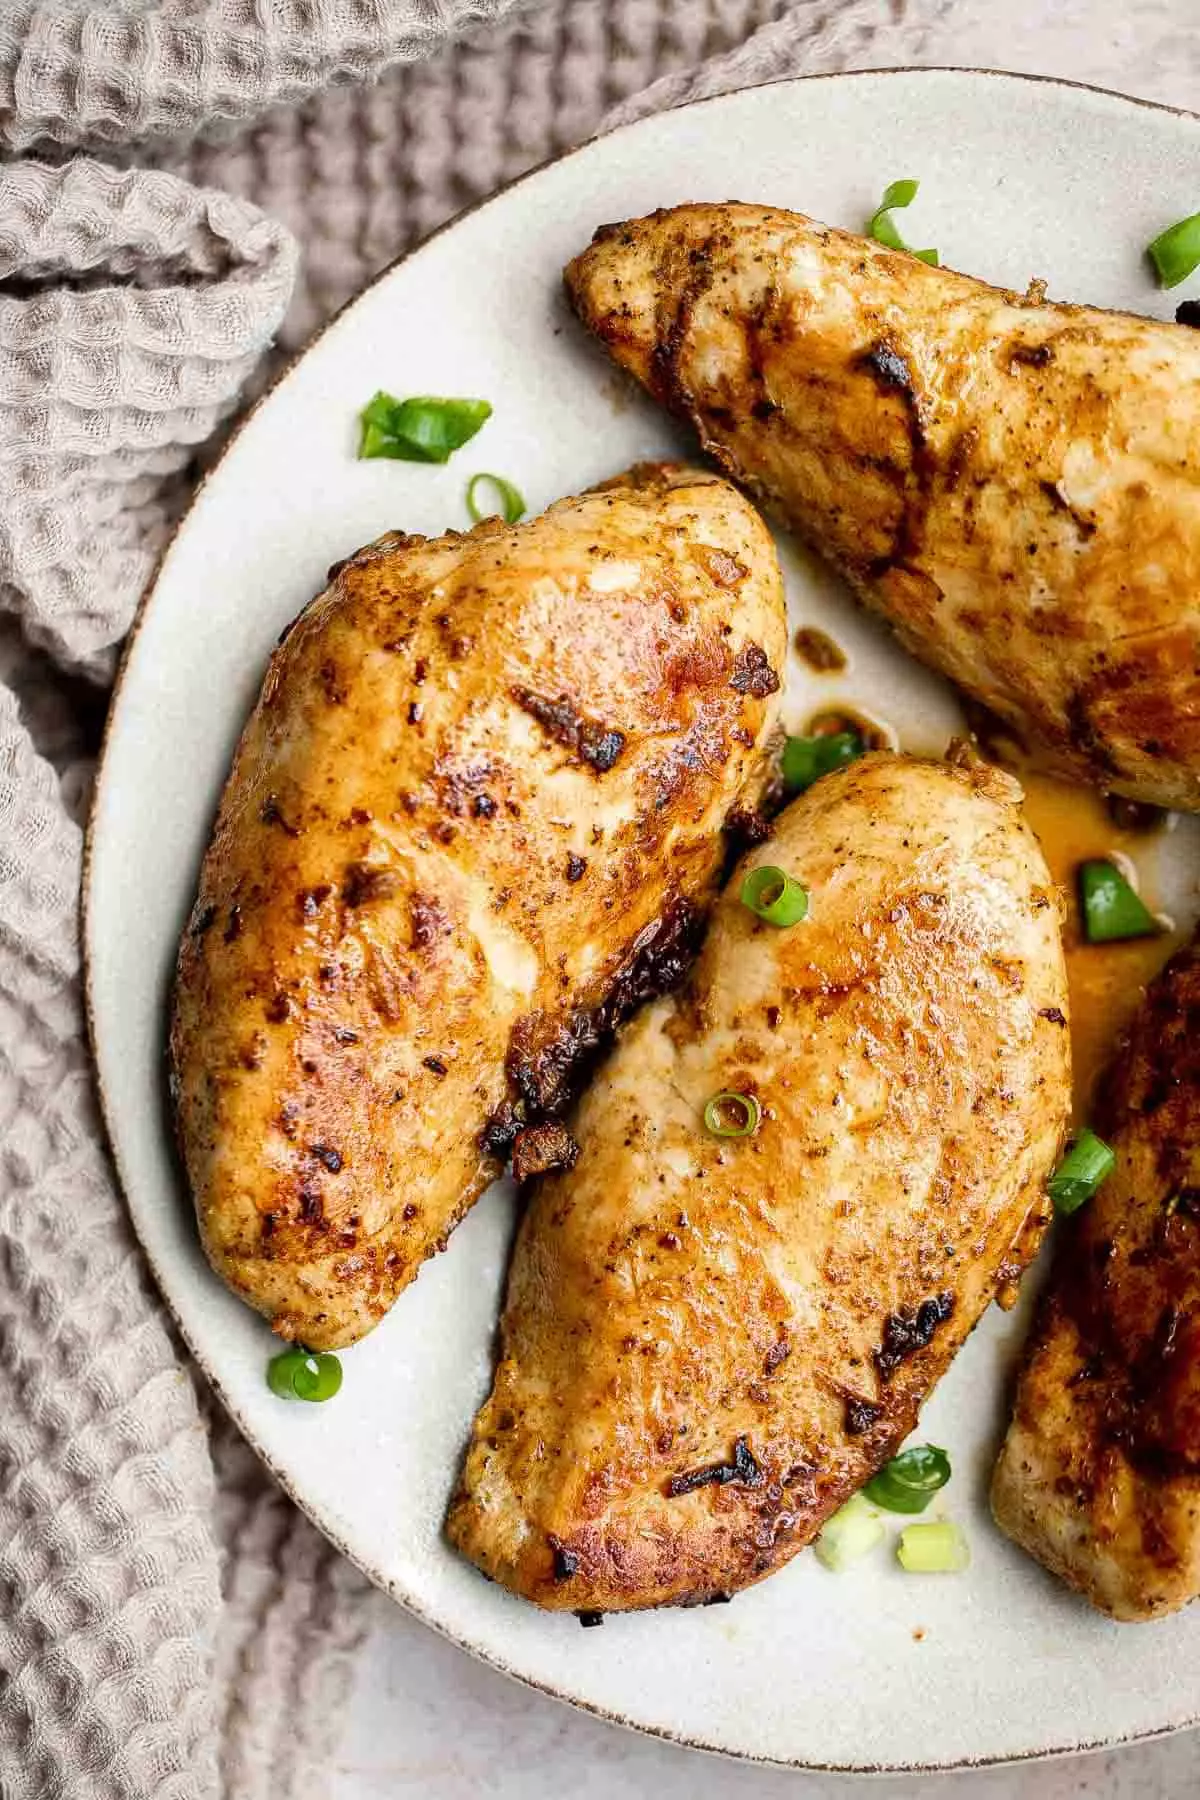 Mexican chicken breast is juicy, tender, and flavorful. It's easy to prep with a quick marinade before cooking on the stove, air fryer, or oven.